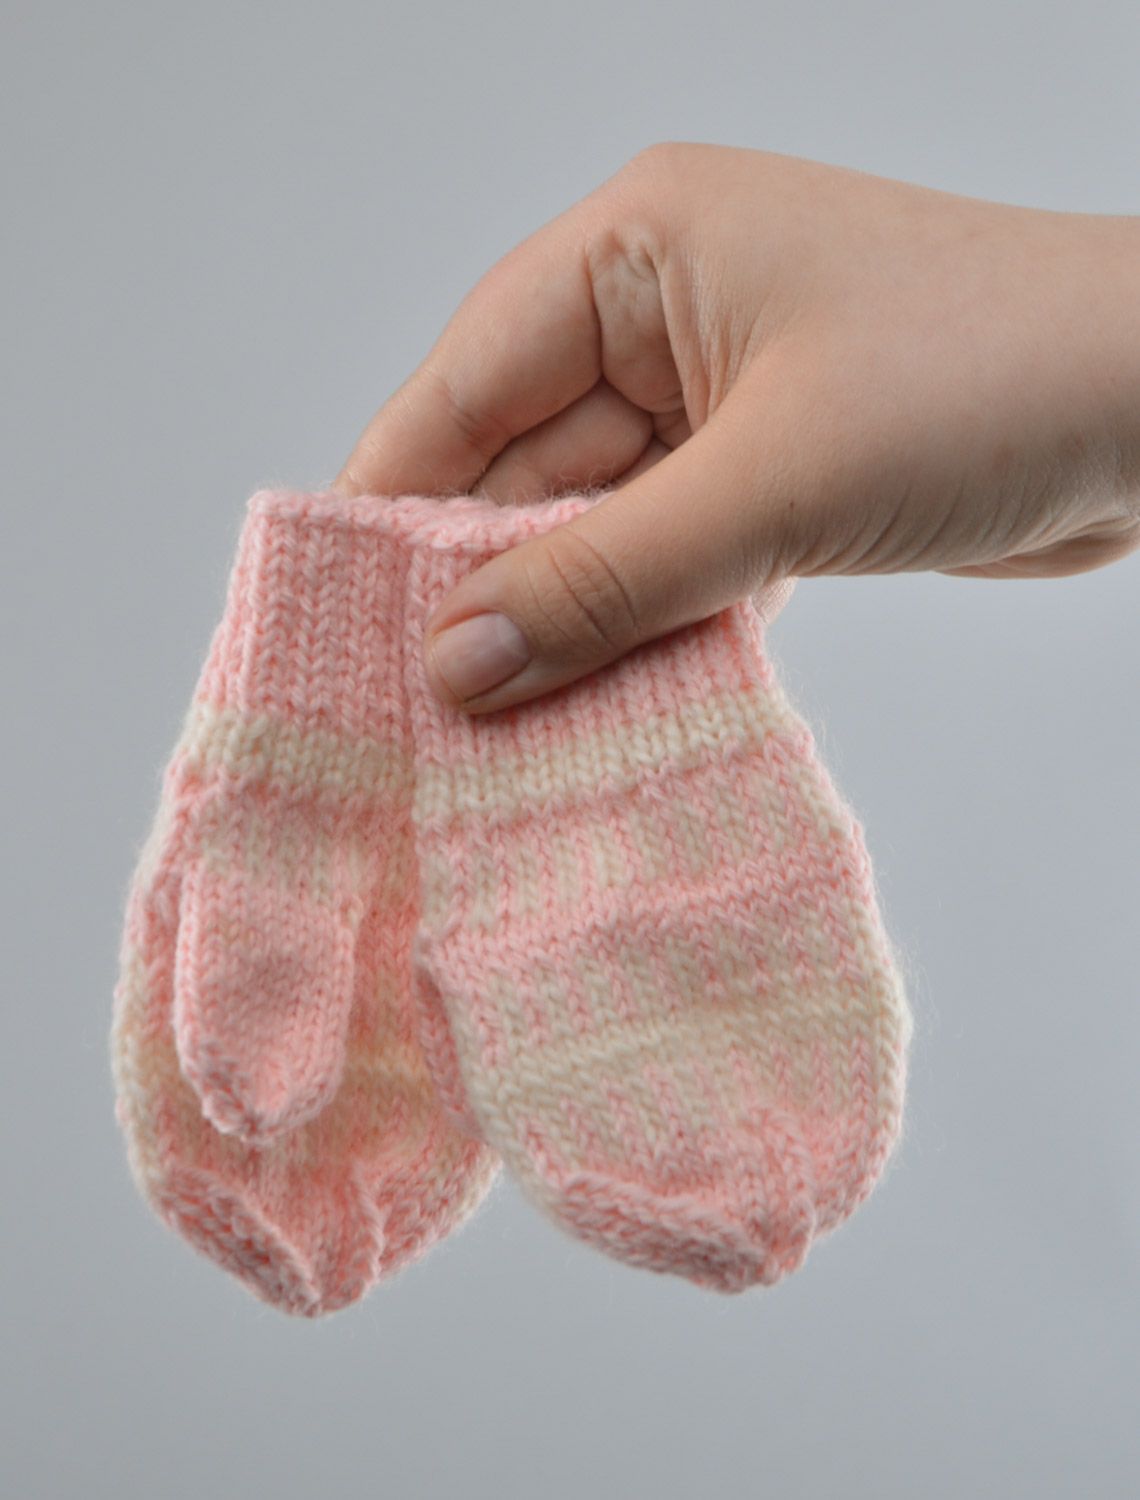 Small handmade warm winter mittens knitted of pink woolen threads for little girl photo 3